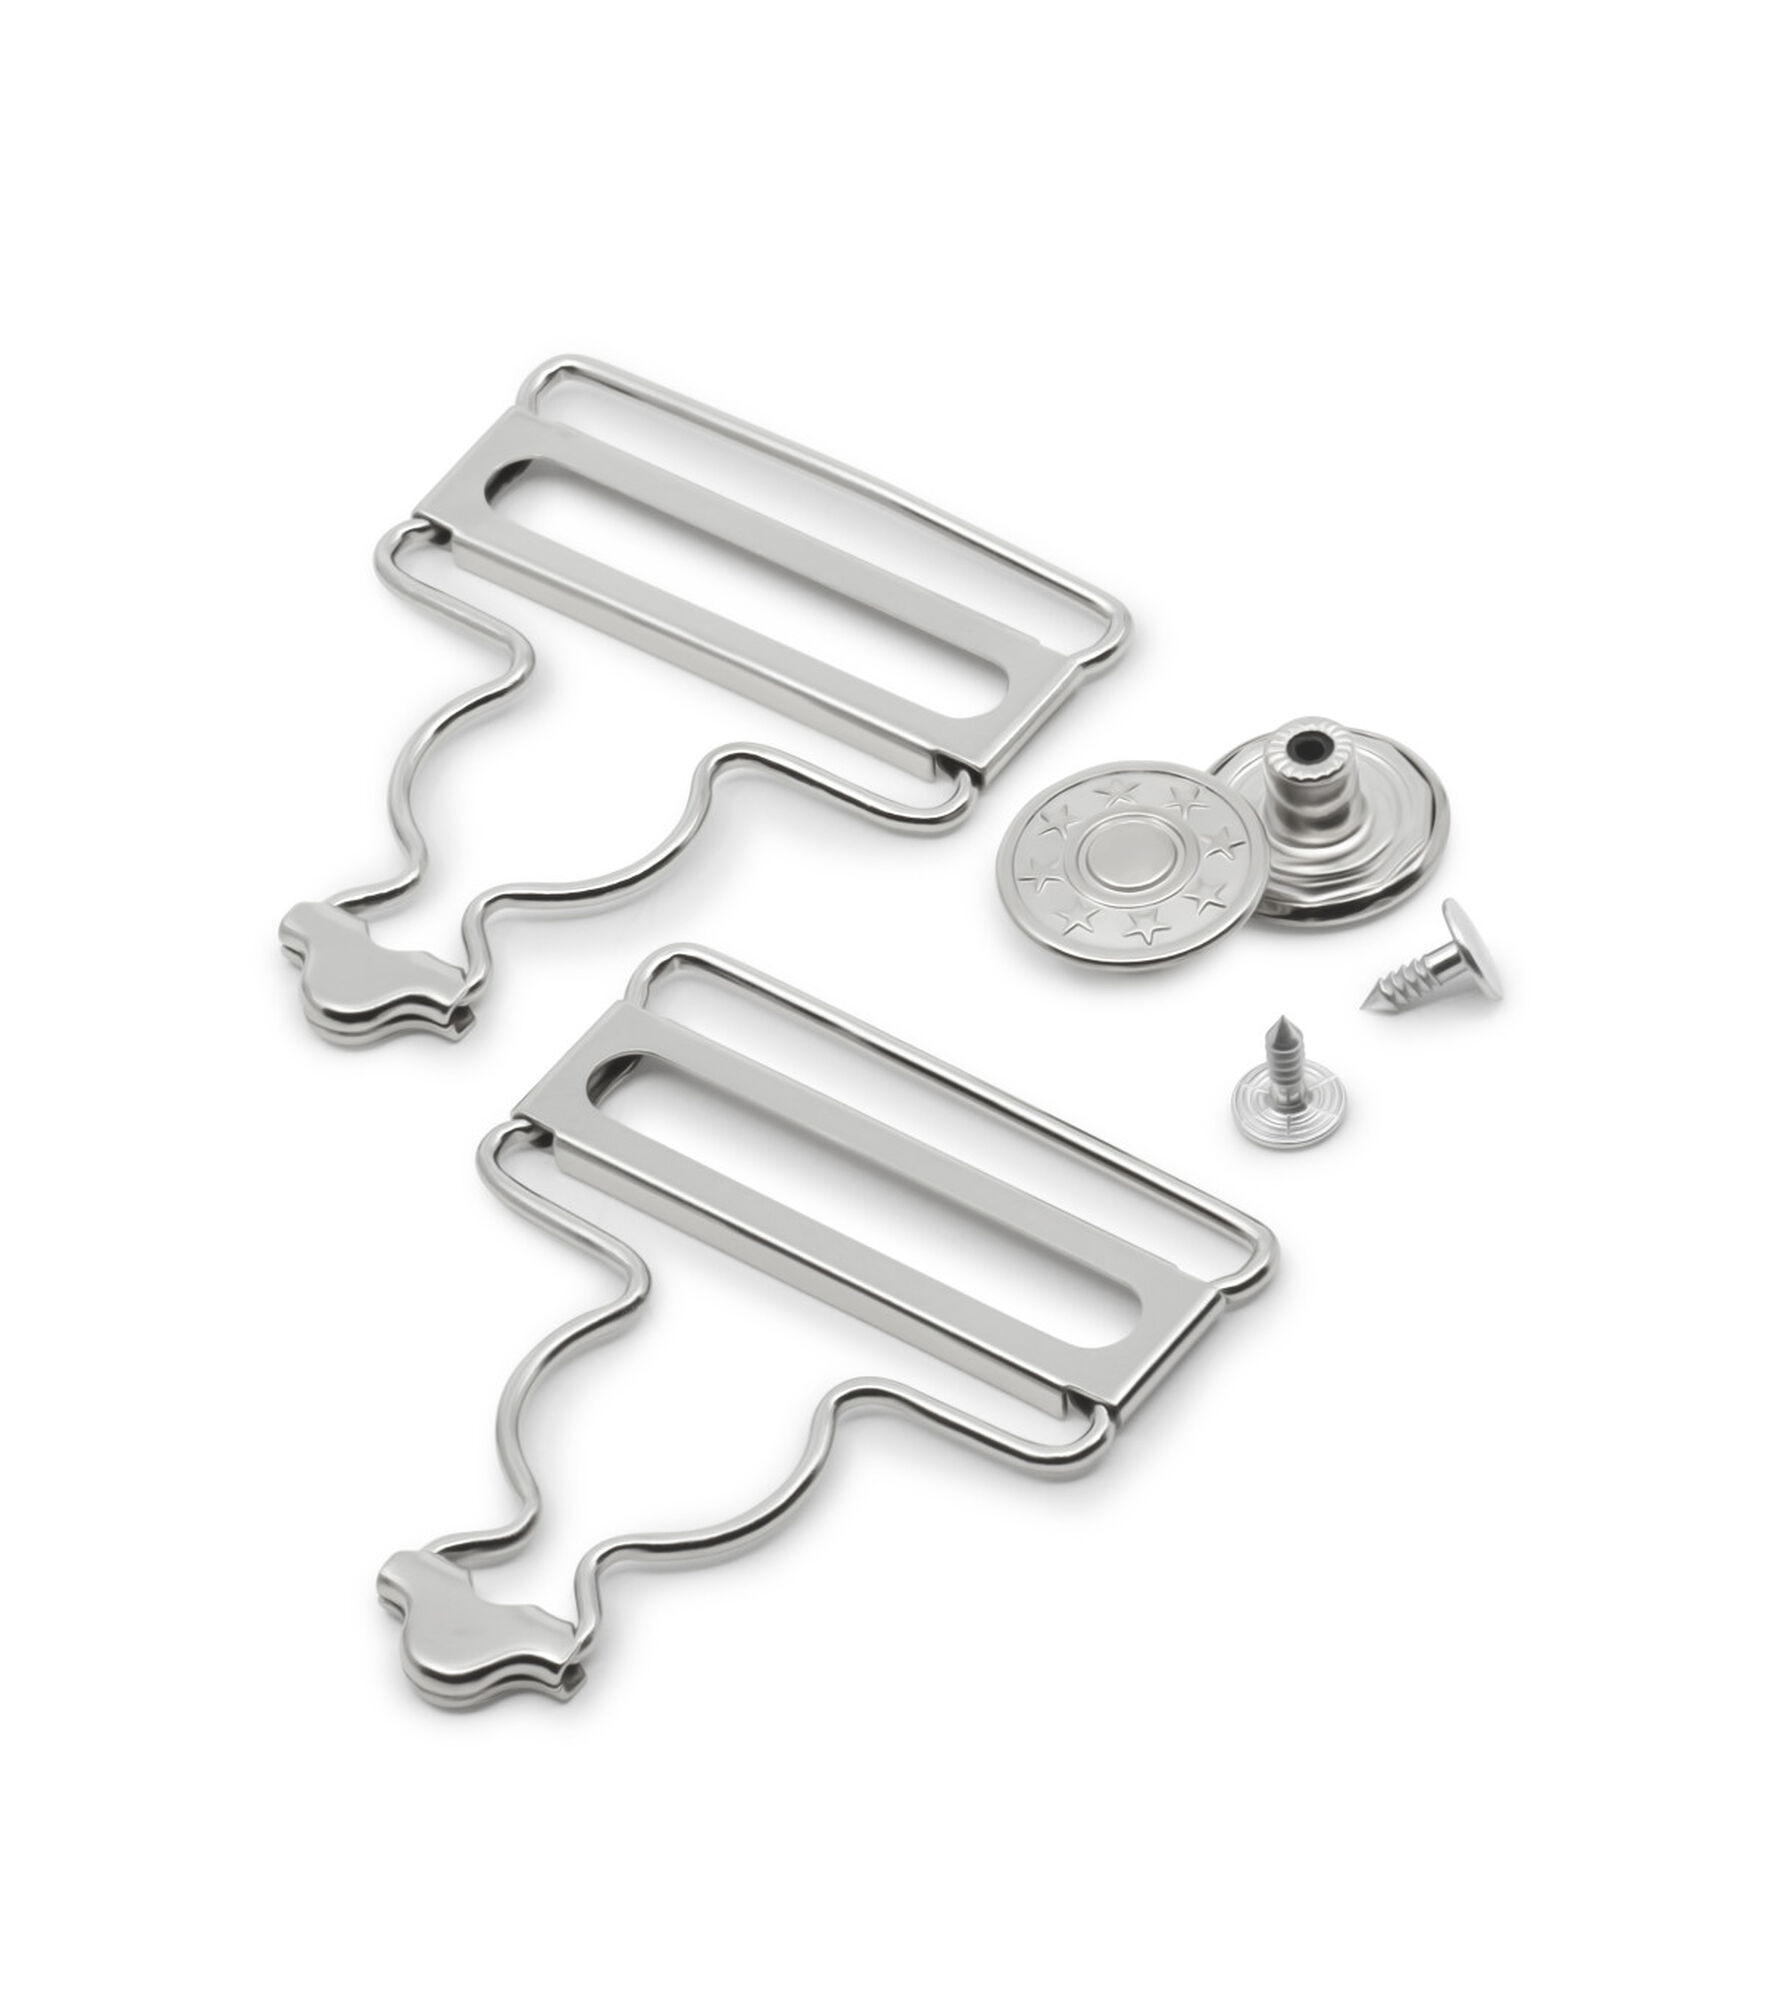 Dritz 1 3/4" Nickel Overall Buckles with No-Sew Buttons 2pk, Nickel, hi-res